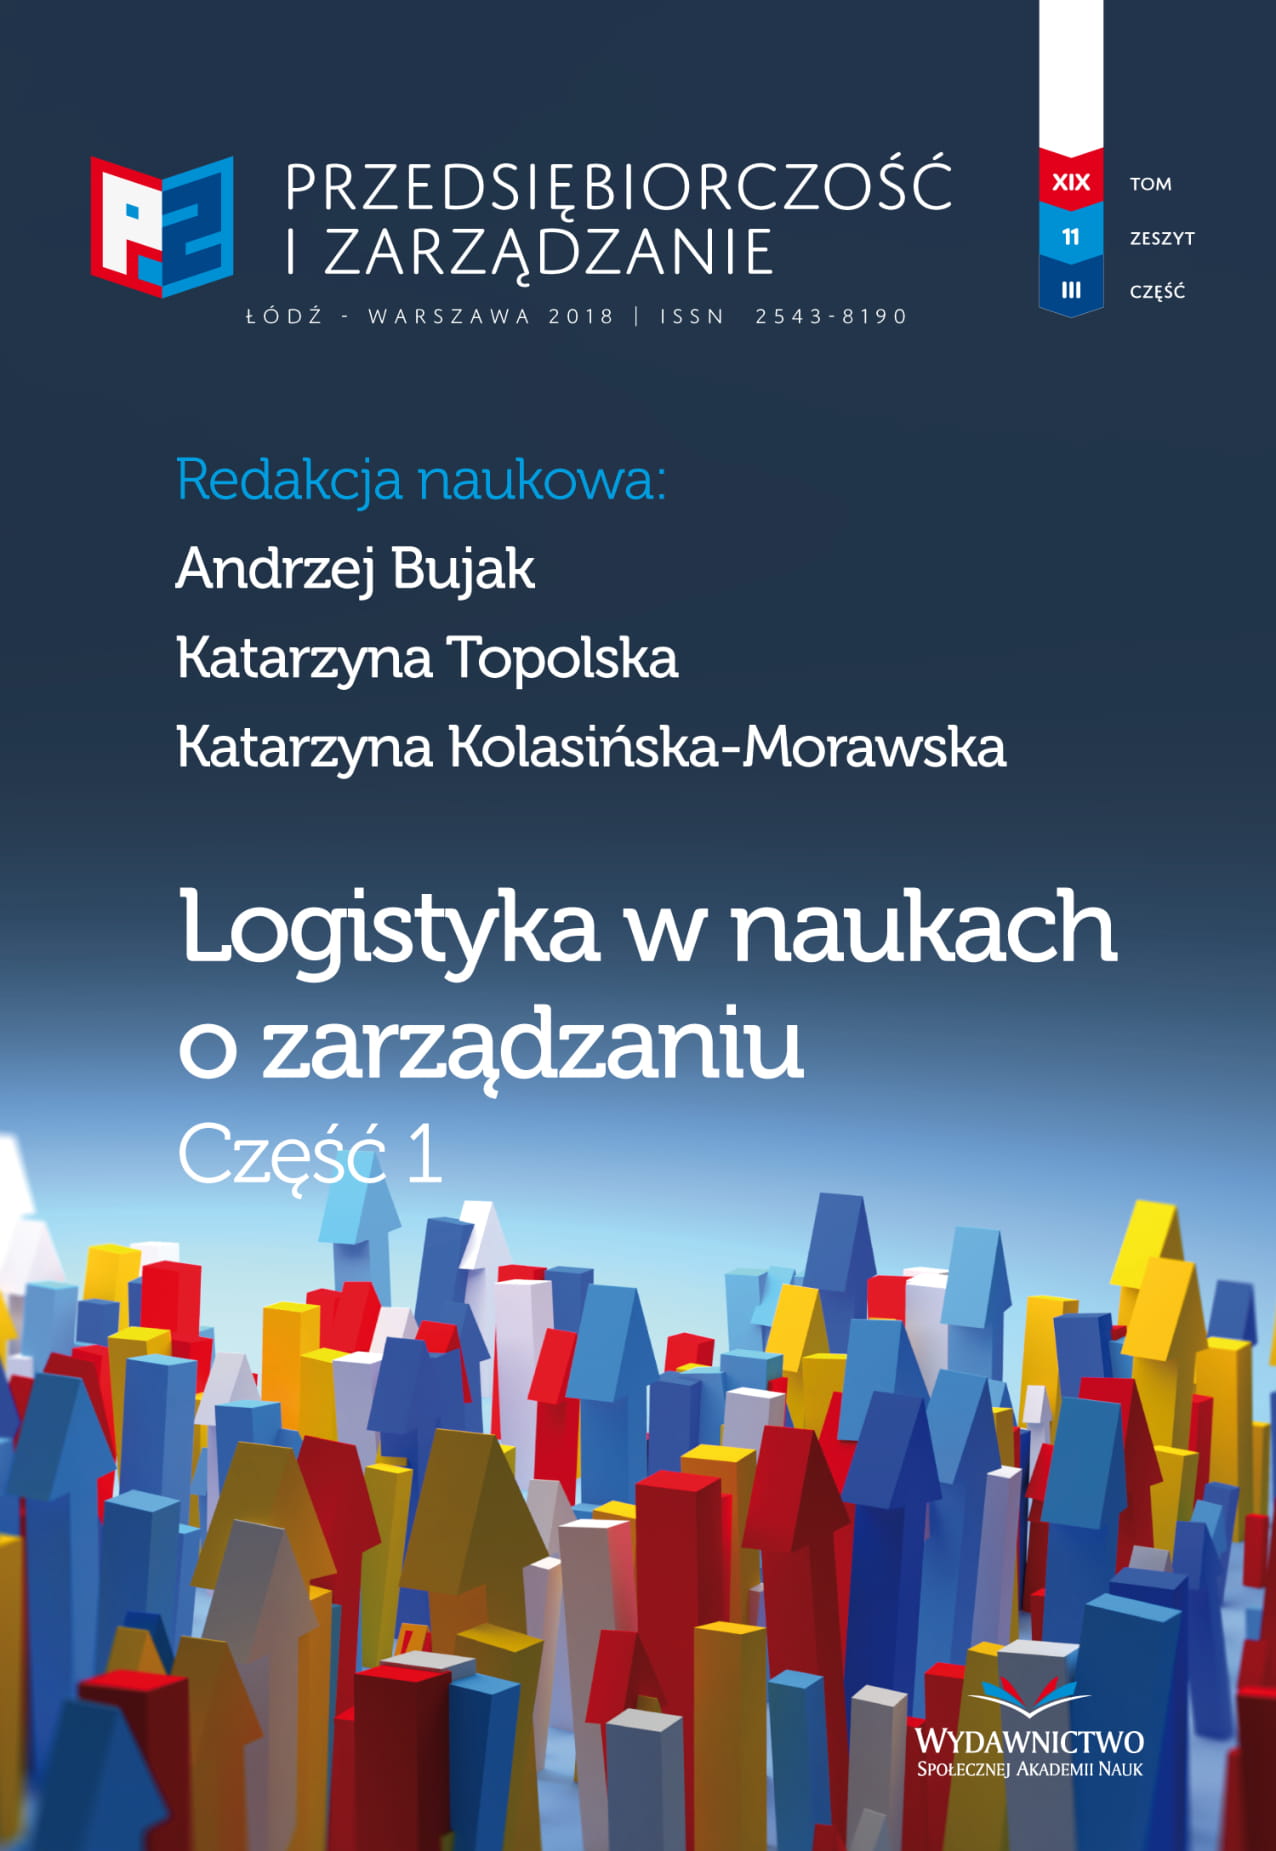 Cost-Benefit Analysis as One of the Obligations in Order
to Implement the Act on Electromobility and Alternative Fuels
in Public Transport in Poland Cover Image